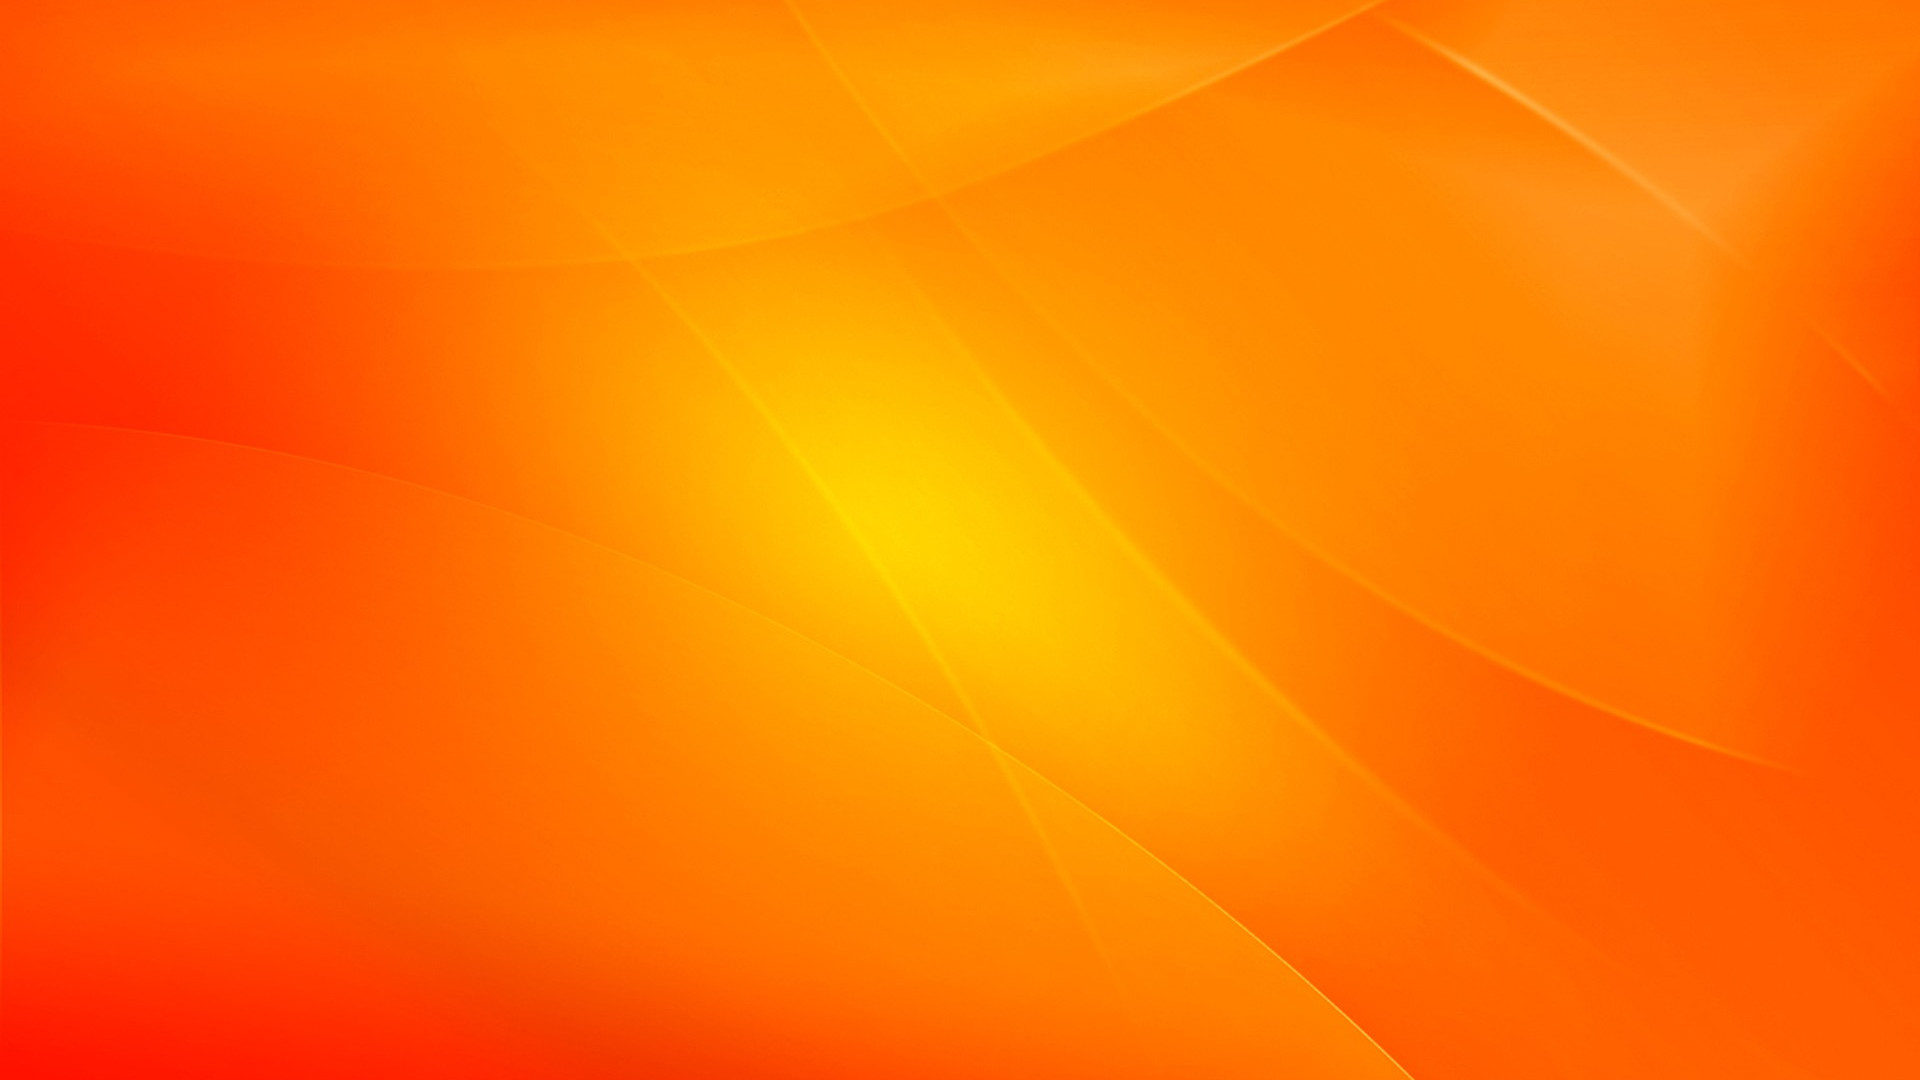 Orange Wallpapers HD Backgrounds Images Pics Photos Free